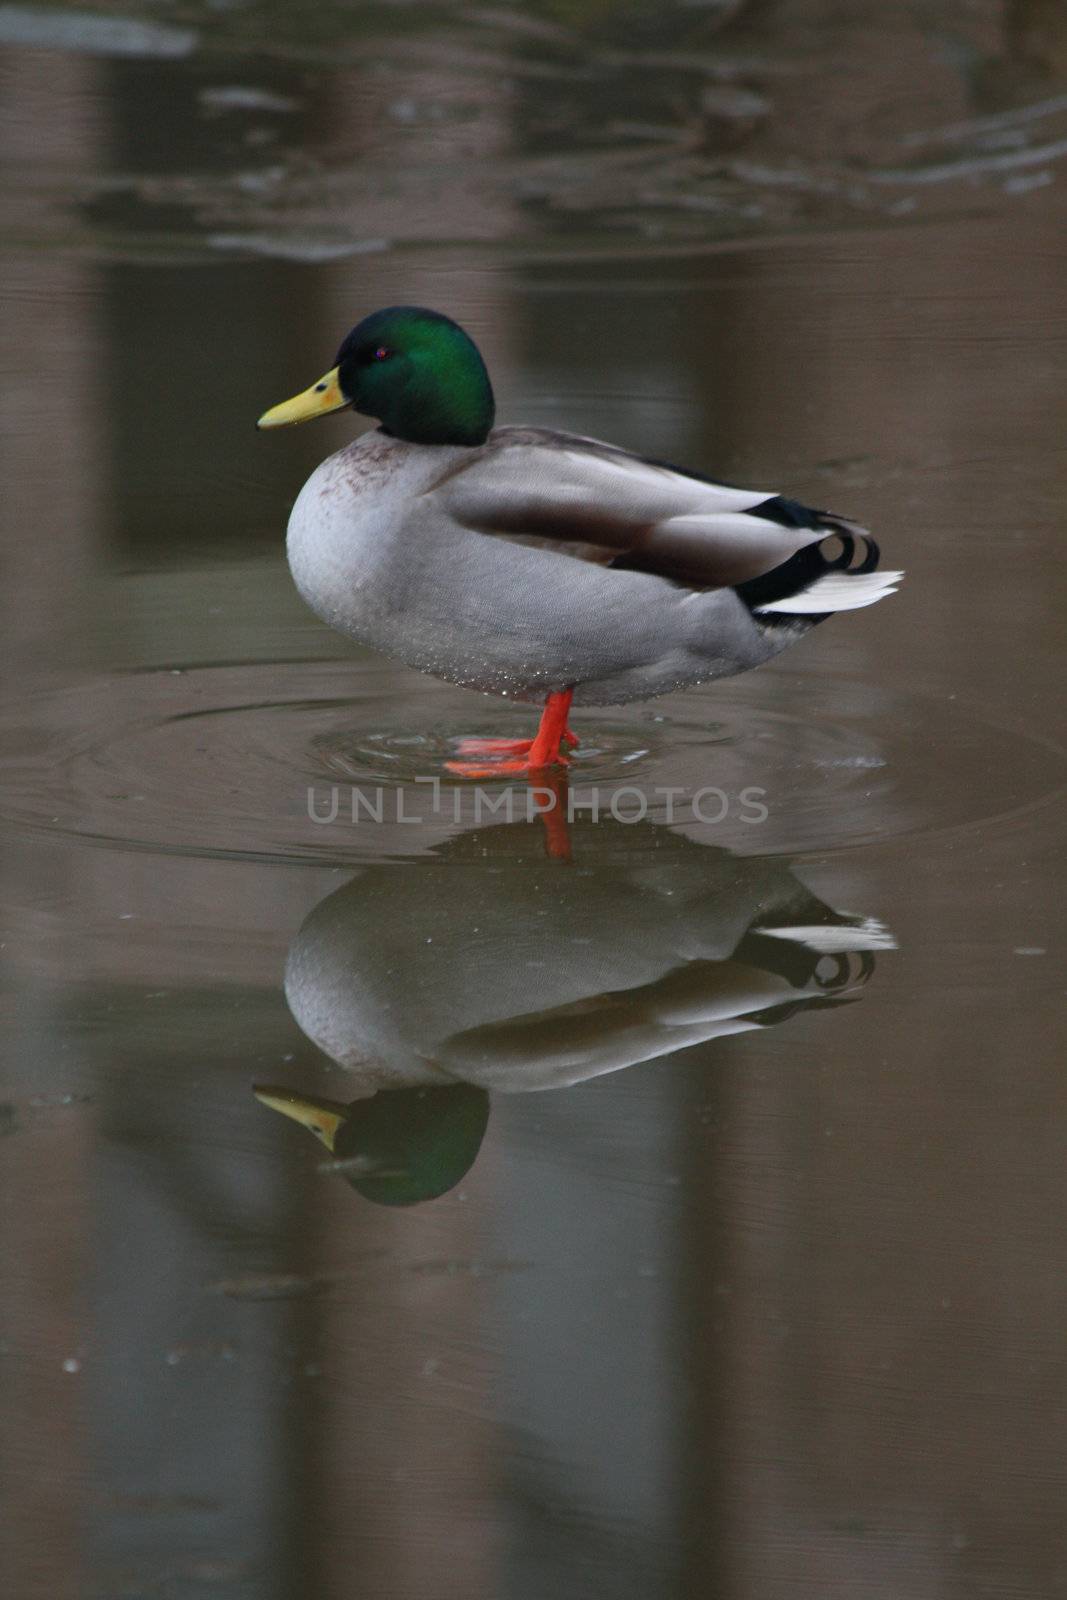 A male duck on ice with his own reflection